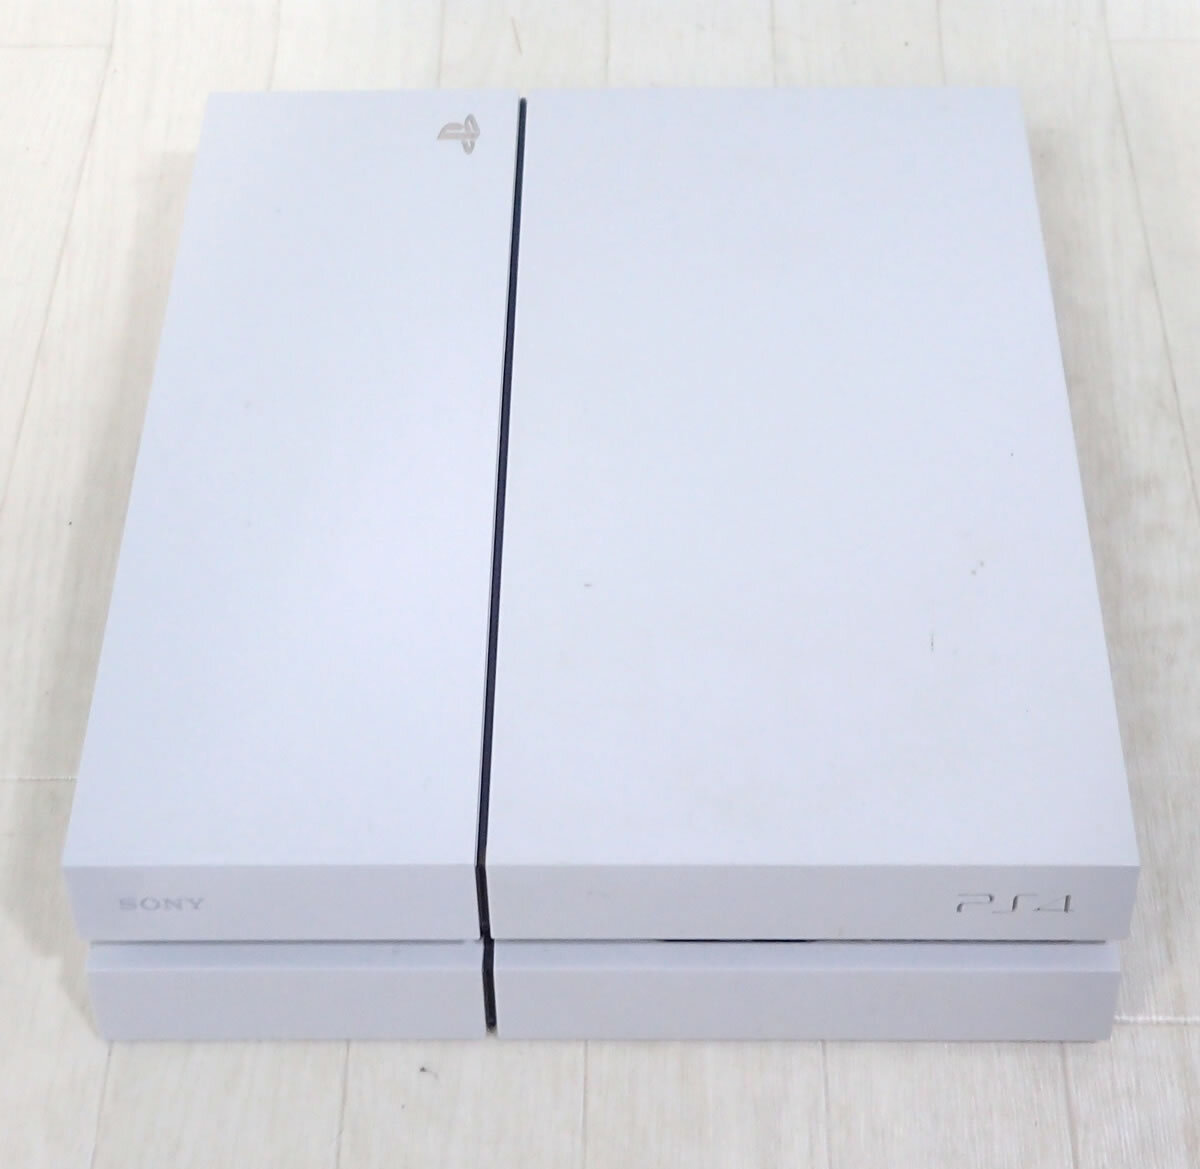 Sony PlayStation 4 500GB white CUH-1100A soft ( disk only ) set used D602